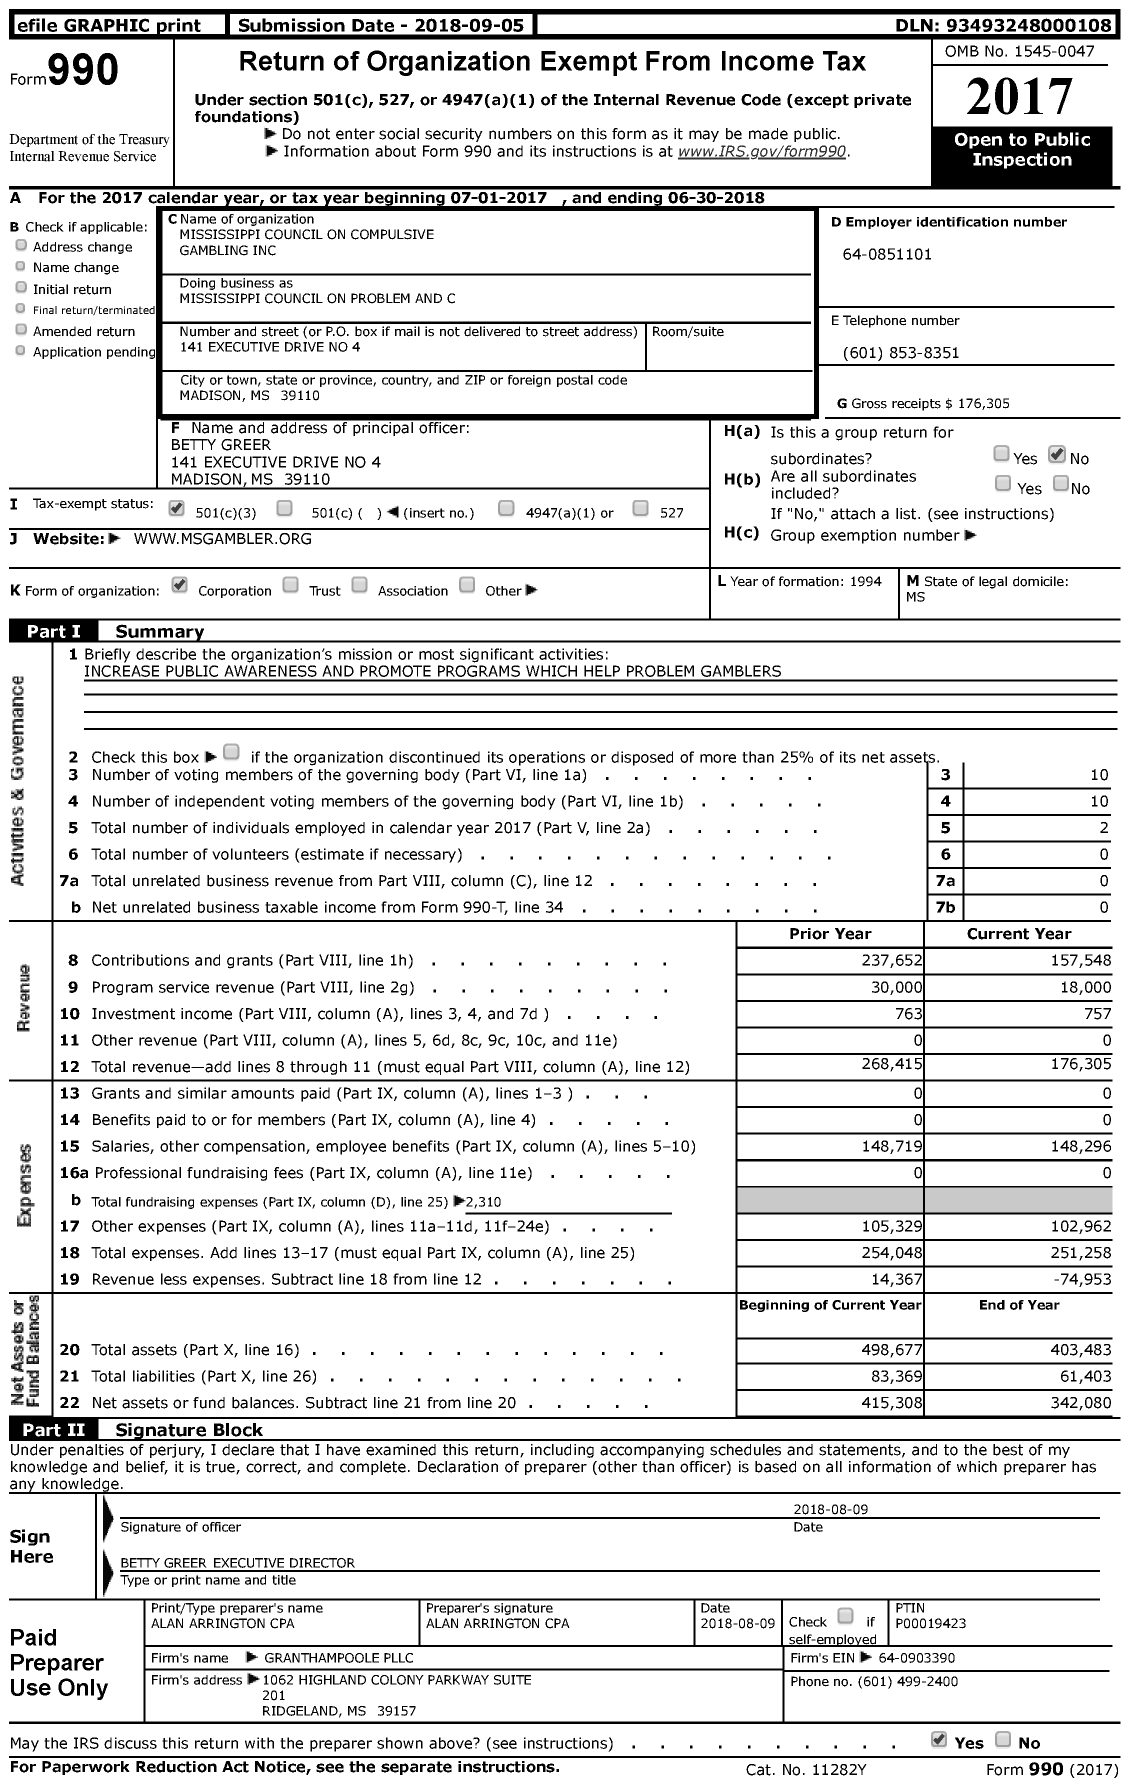 Image of first page of 2017 Form 990 for Mississippi Council on Problem and C